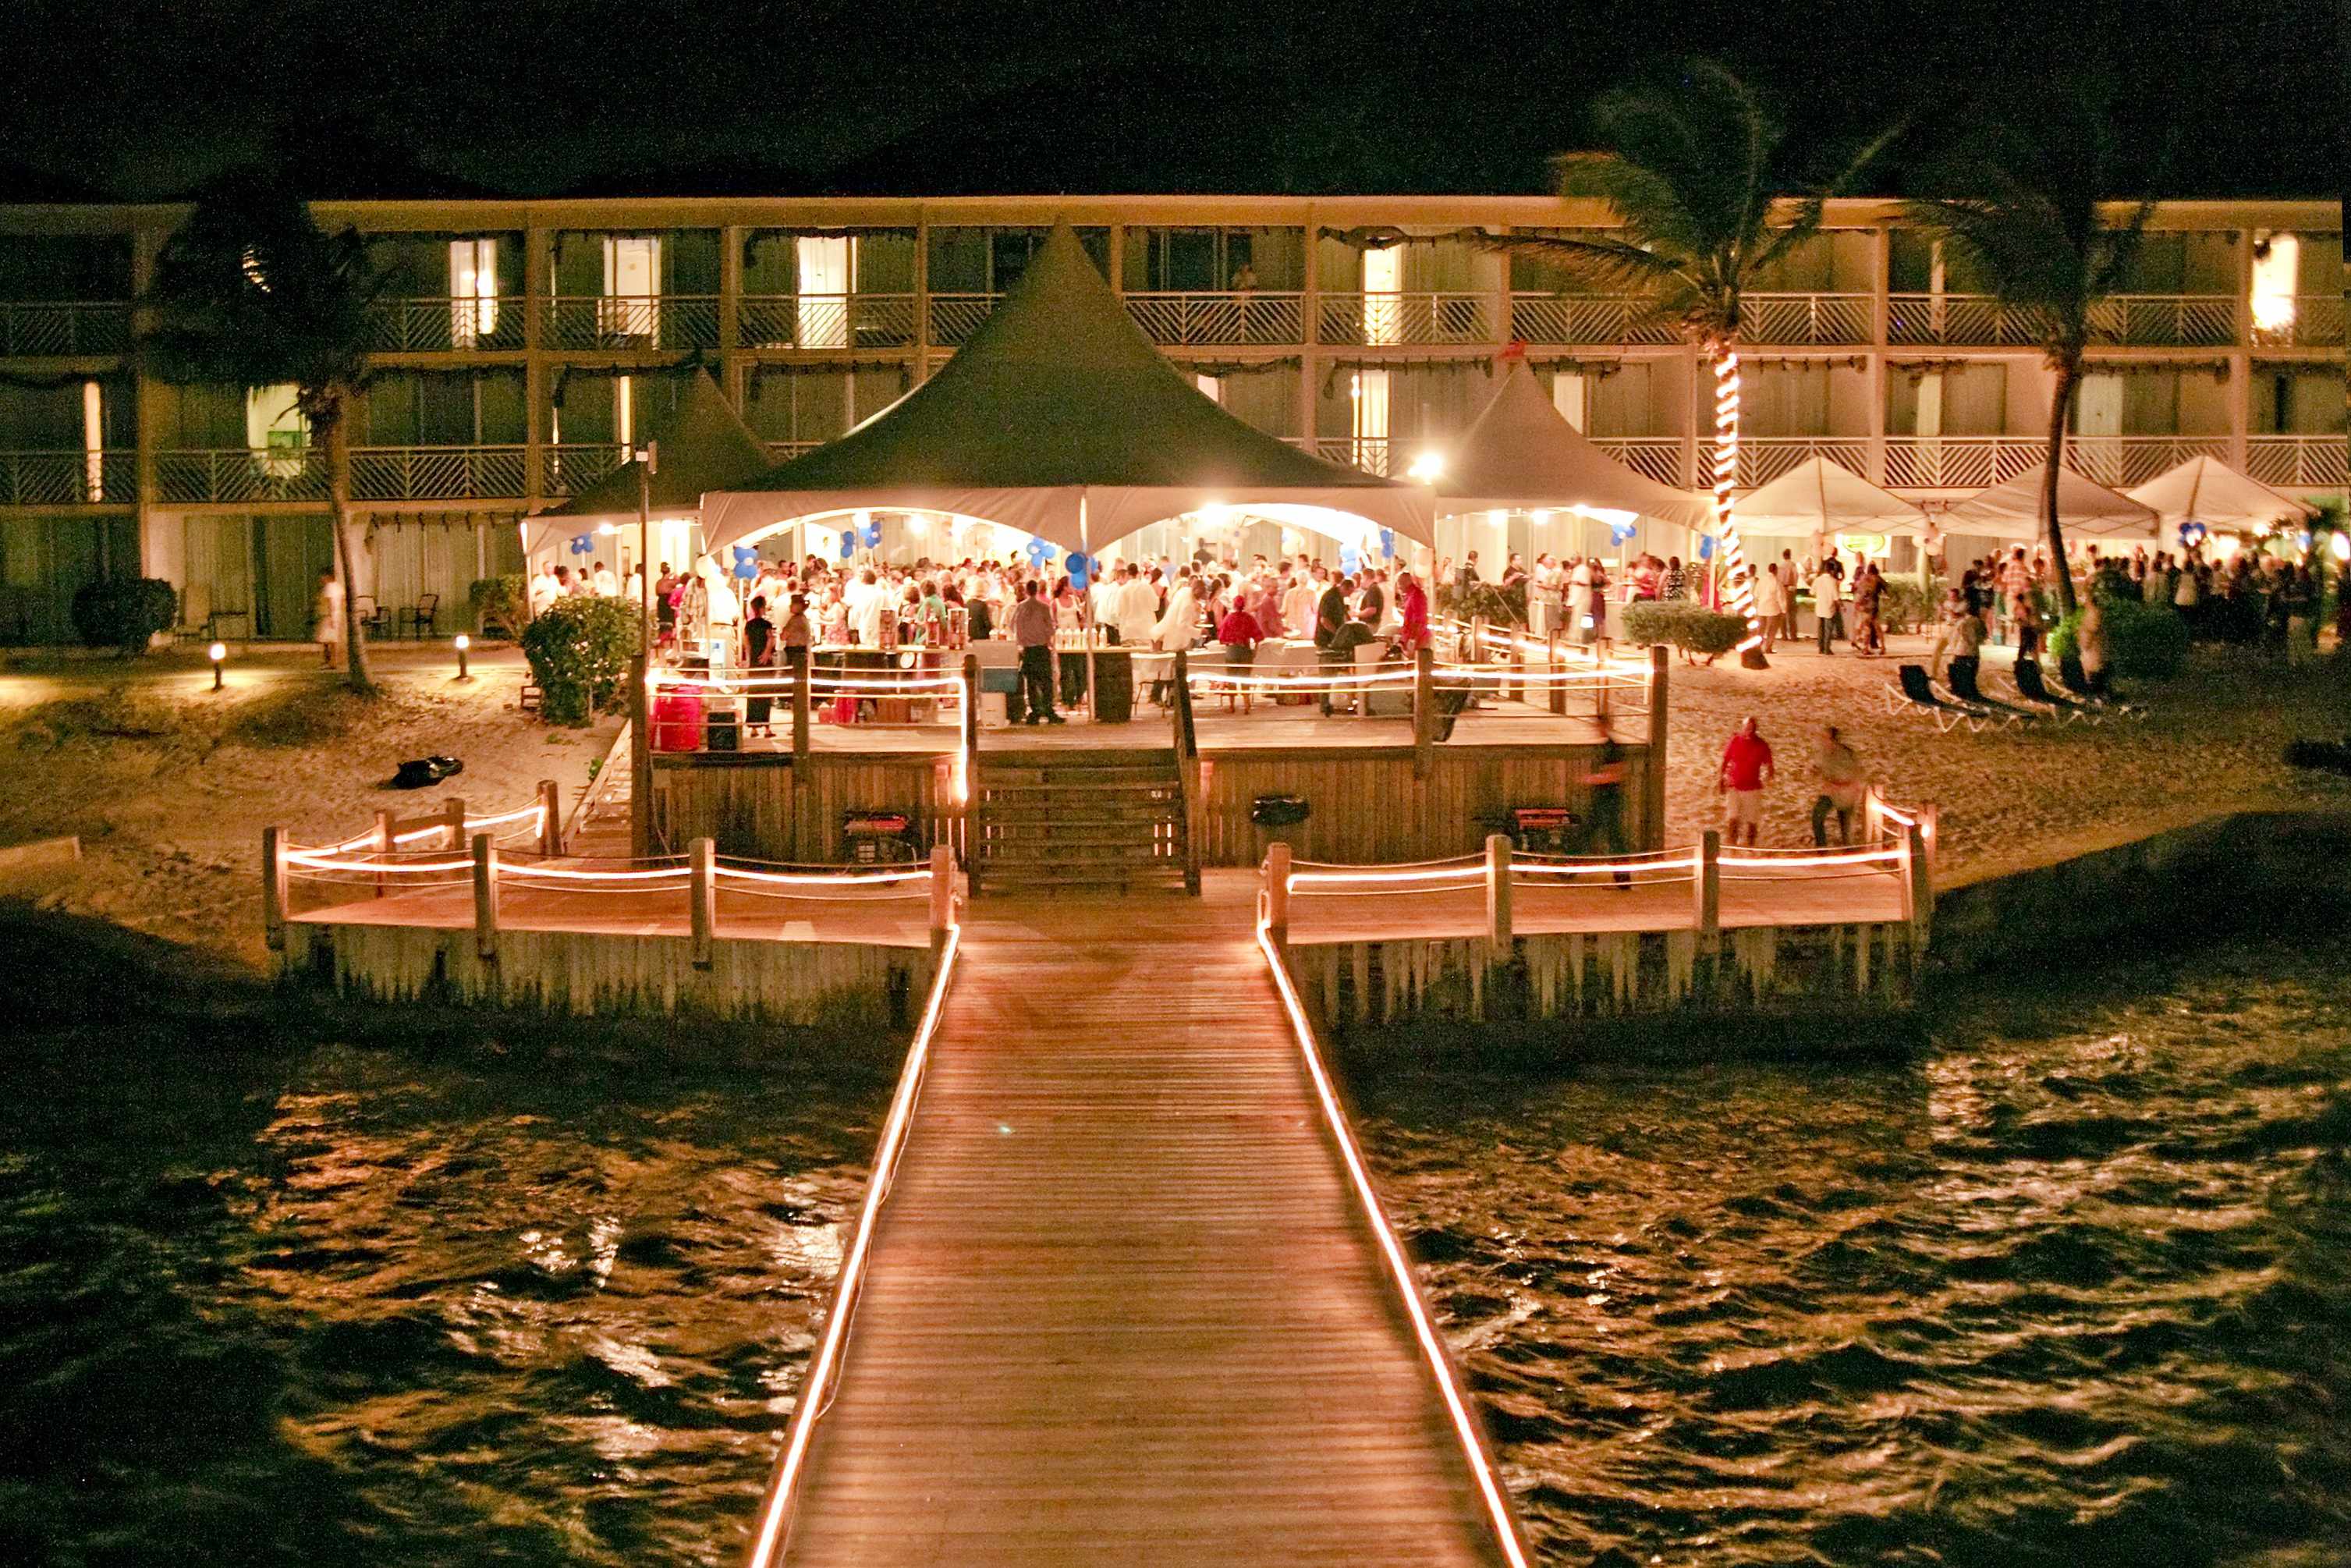 A Taste of St. Croix is the main event for the St. Croix Food & Wine Experience. Tickets sell out in 20 minutes.